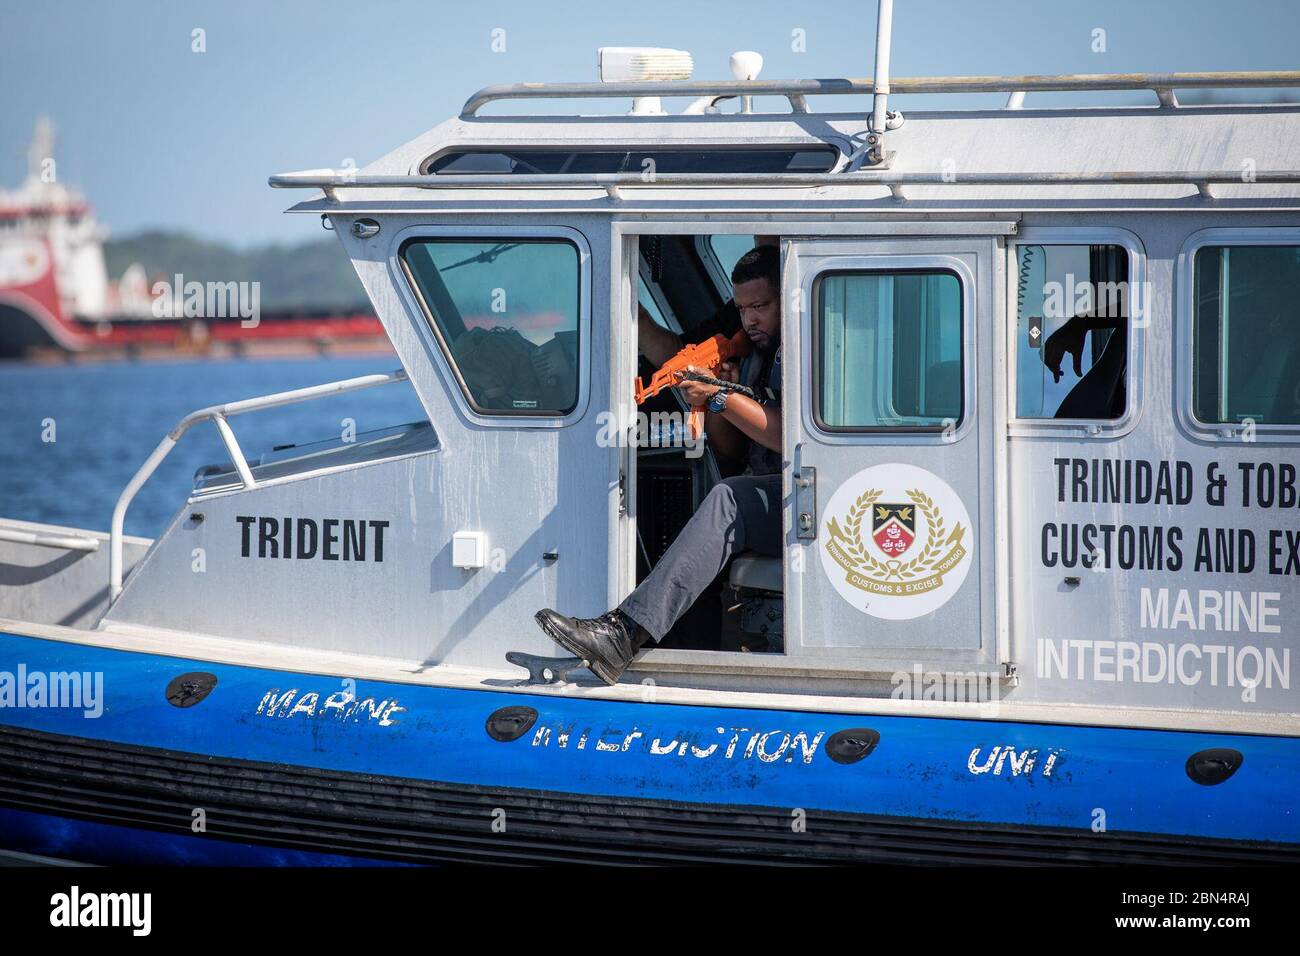 A Trinidad and Tobago Customs and Excise officer positions himself in a SAFE boat for scenario-based training conducted by U.S. Customs and Border Protections Air and Marine Operations on Sept. 26, 2019, off the coast of Chaguaramas, Trinidad, a mere 8-mile boat ride from the country of Venezuela. A decade has passed since TTCE officers have received any formal marine training from the United States. CBP Stock Photo